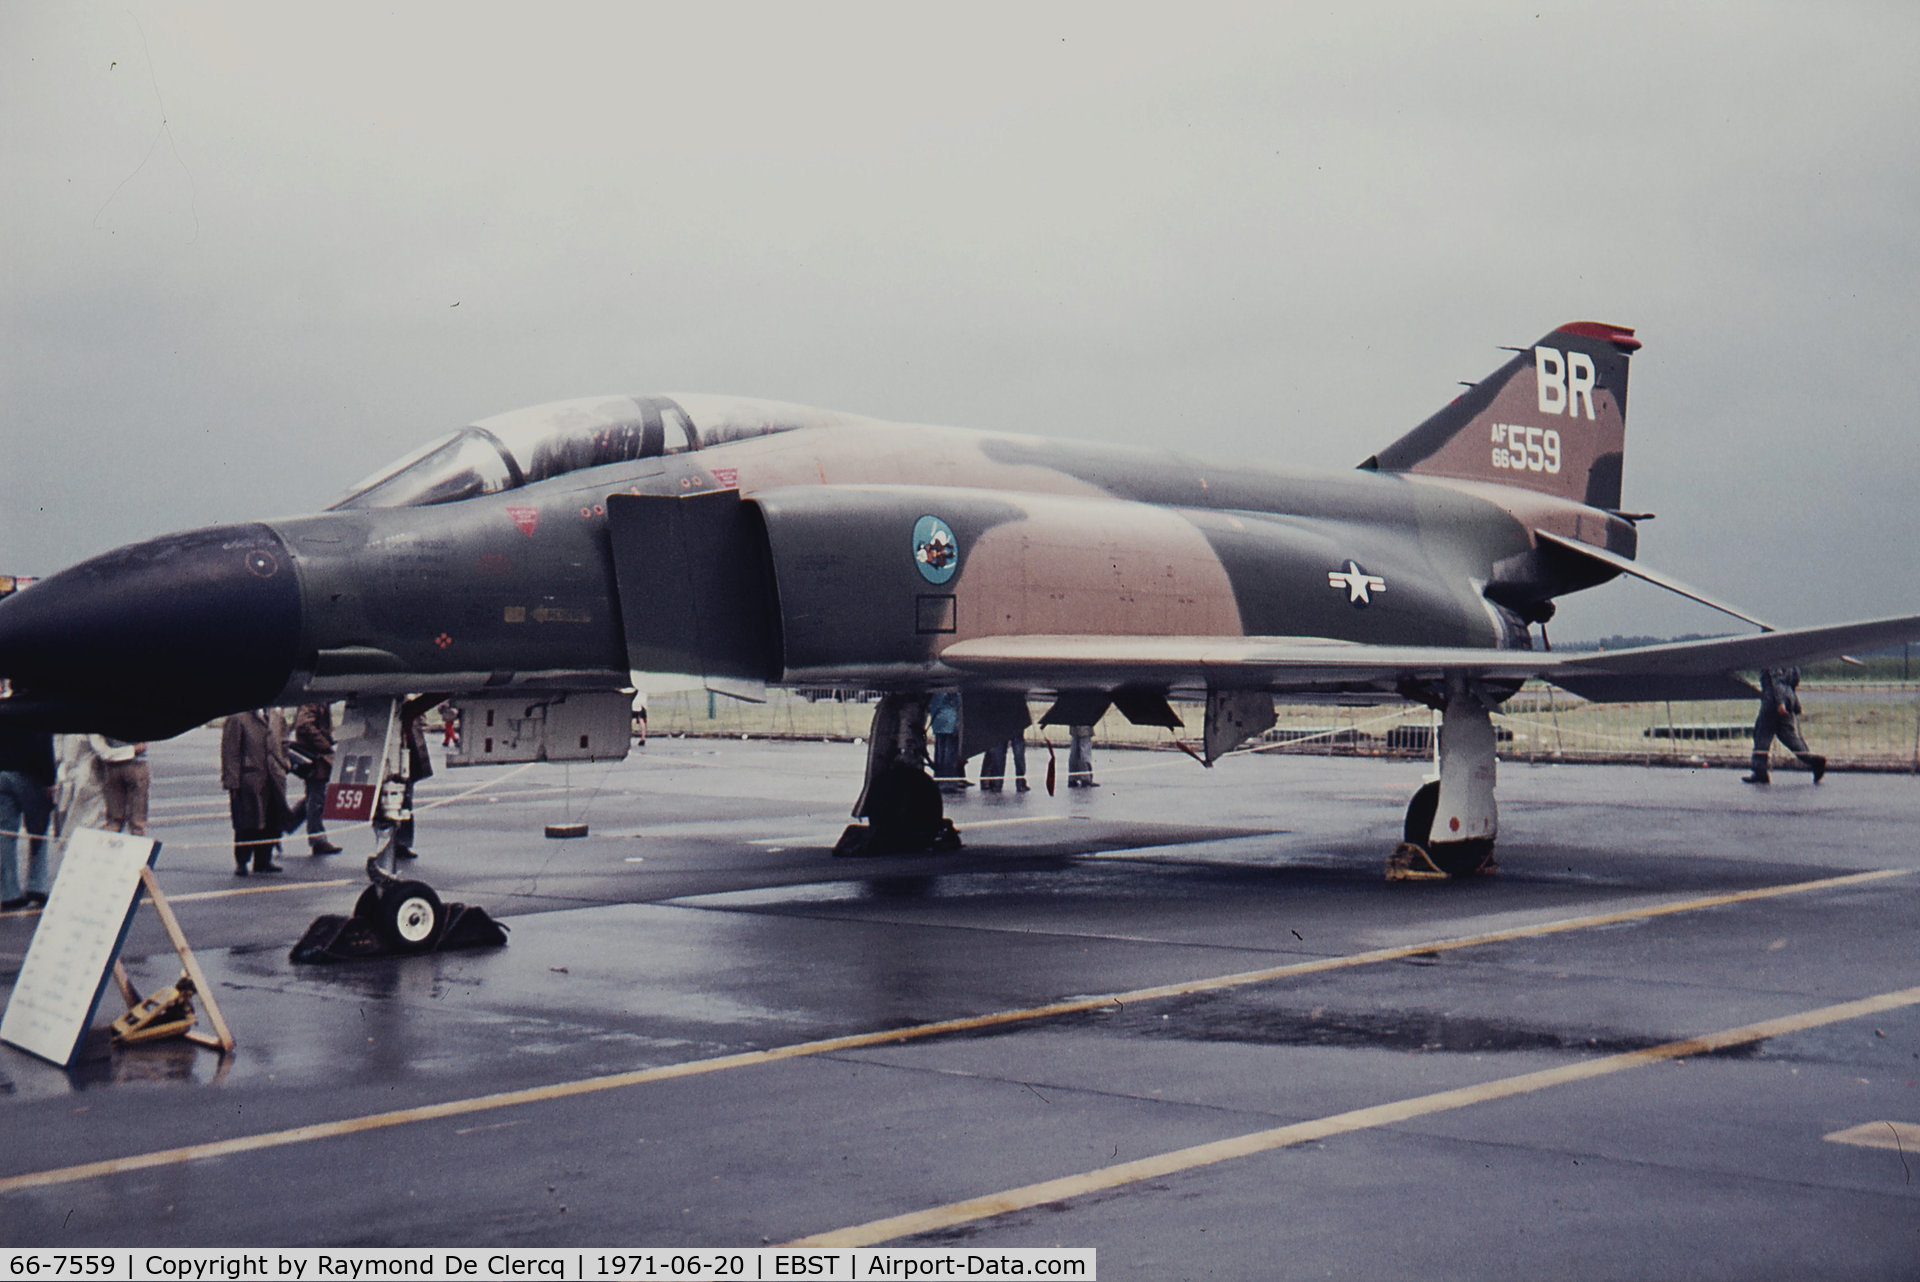 66-7559, 1966 McDonnell F-4D-30-MC Phantom II C/N 2100, At BAF meeting Brustem in 1971. This aircraft crashed in Spain after collision with Phantom 66-7620 on 1981-03-03.